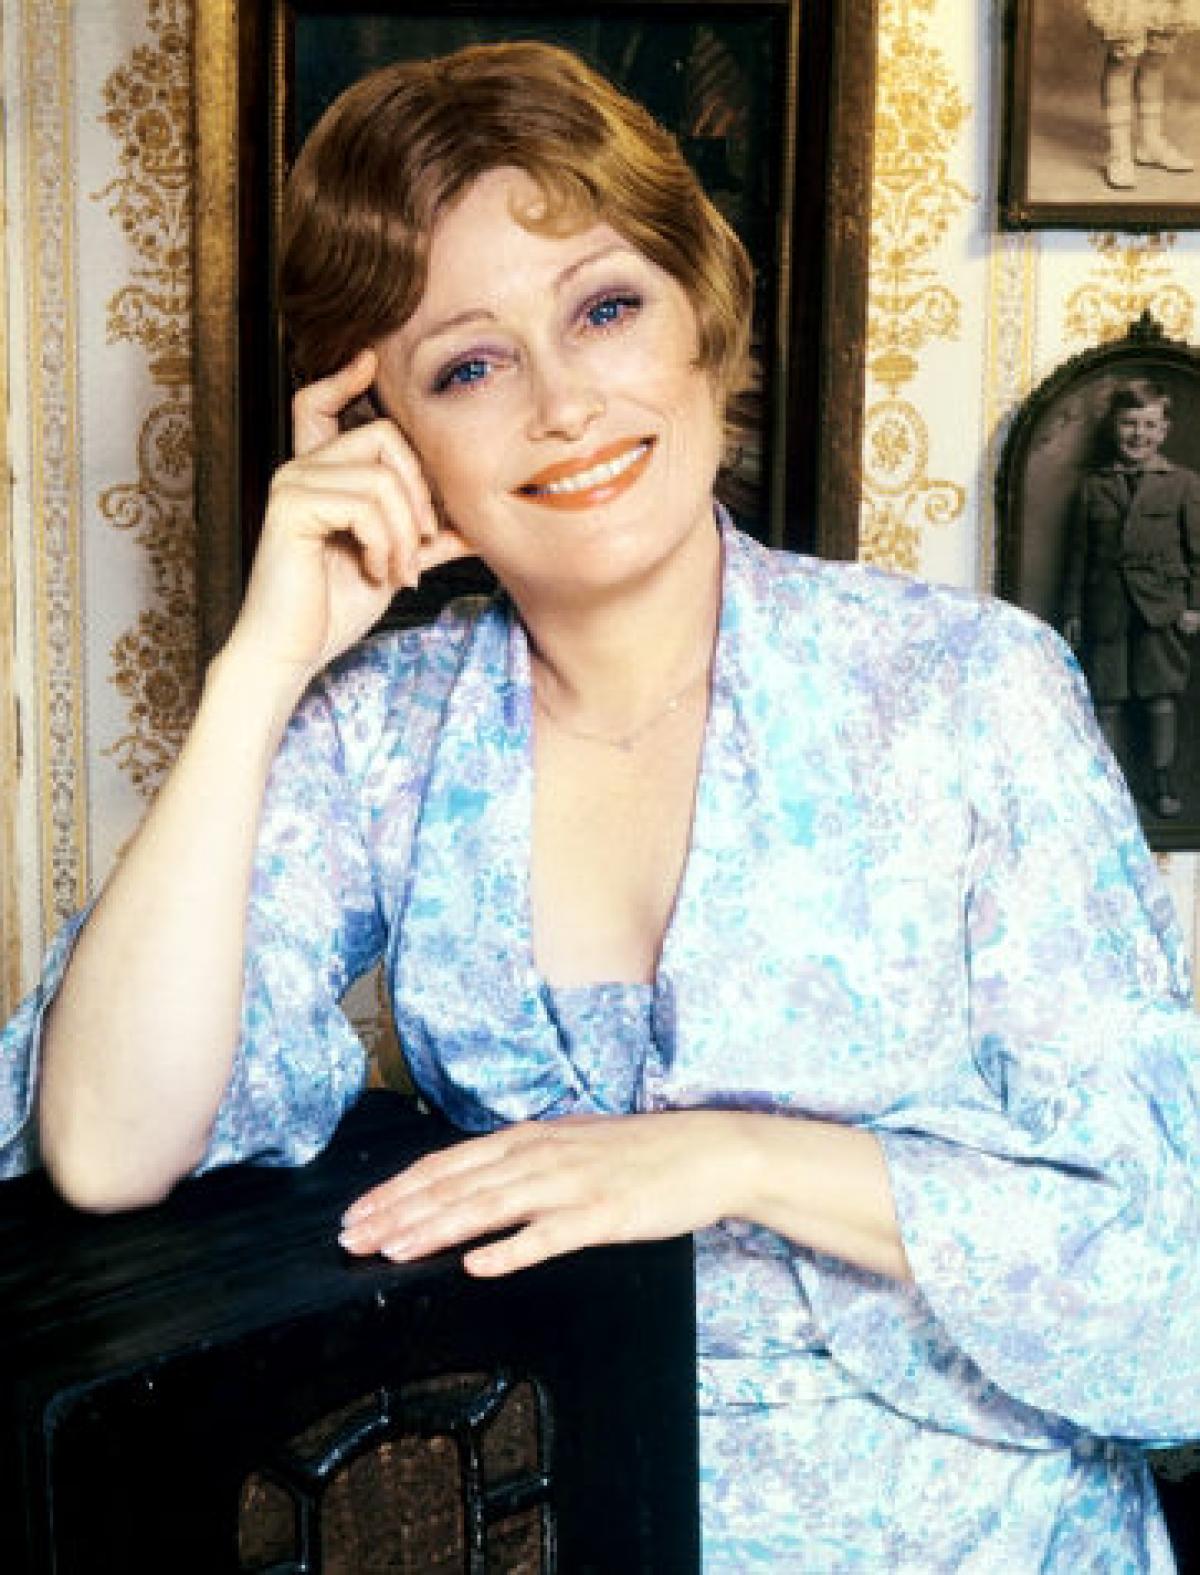 More Pictures Of Rue McClanahan. rue mcclanahan scandal. 